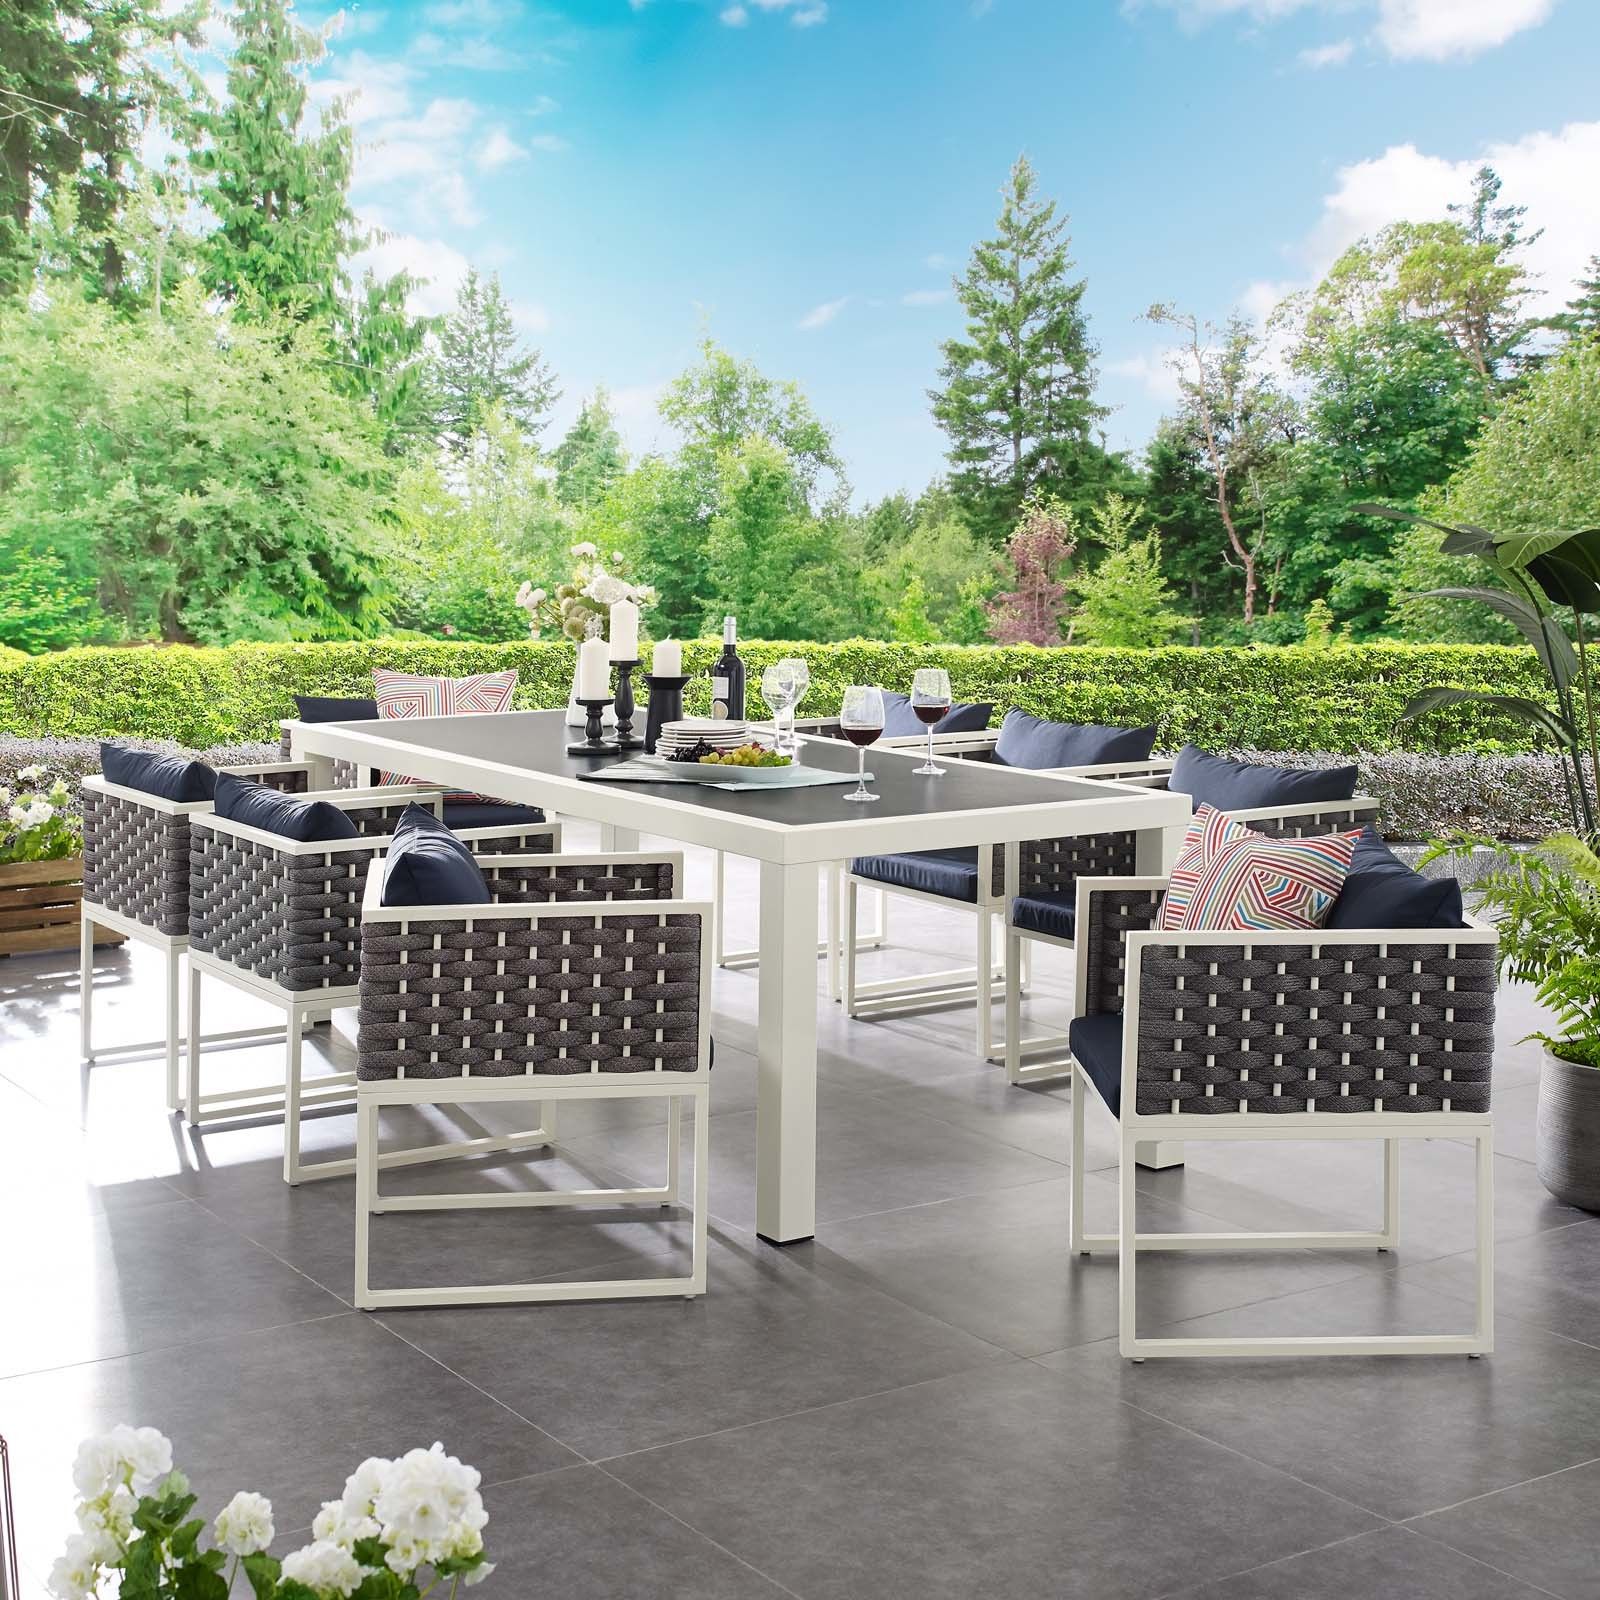 Trendy Stance White Navy 9 Piece Outdoor Patio Aluminum Dining Set Eei 3186 Inside Navy Outdoor Seating Sets (View 10 of 15)